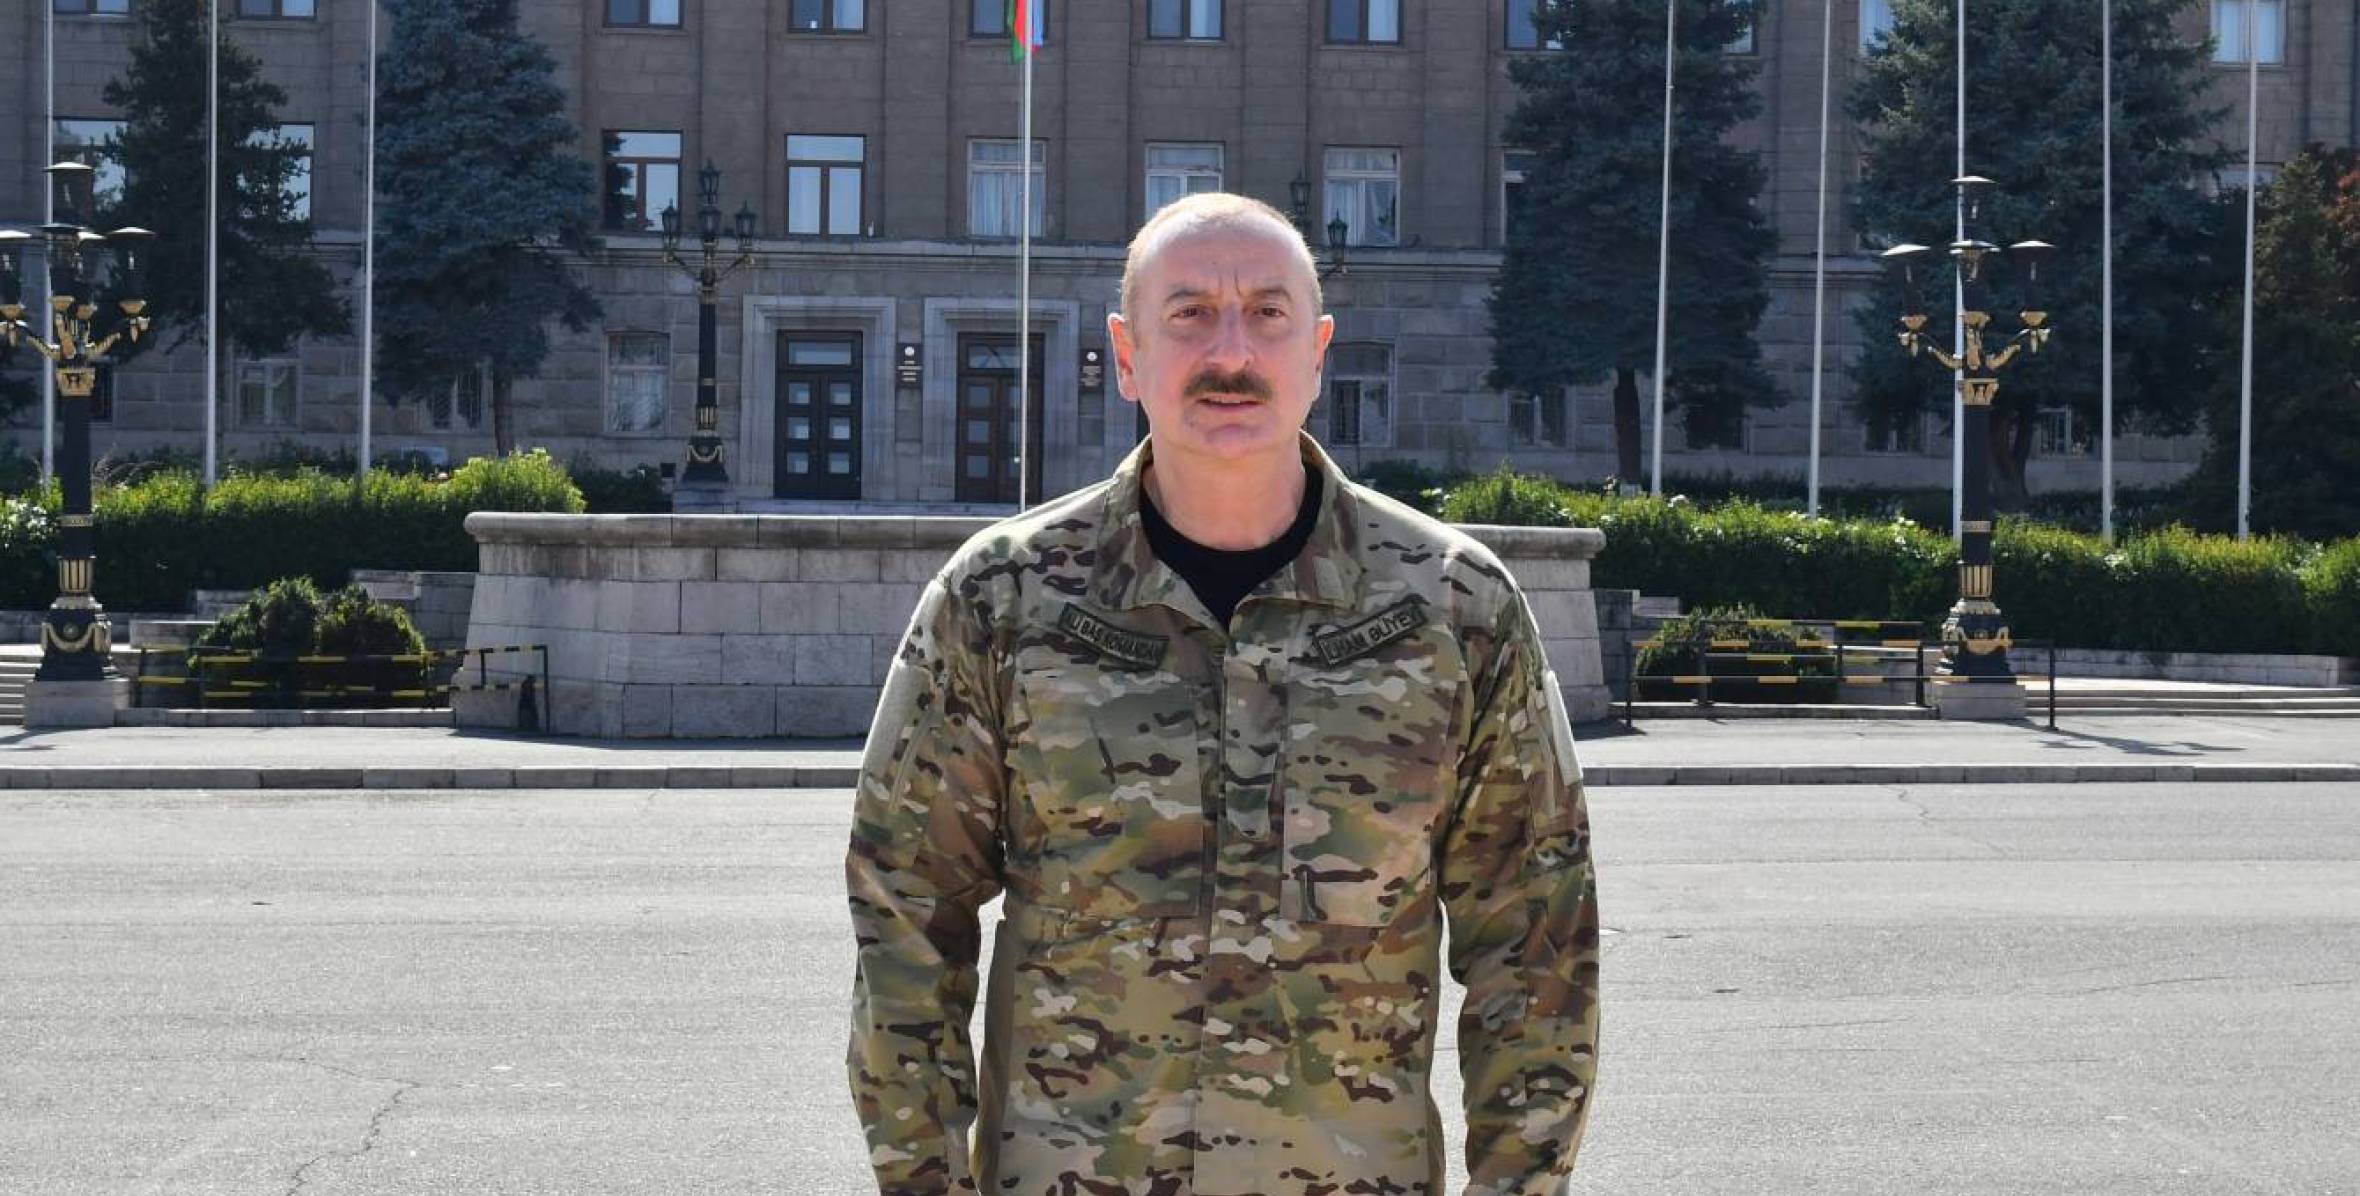 Ilham Aliyev’s visit to the city of Khankendi and the districts of Terter, Shusha, Khojaly, Khojavend, Aghdam and Fuzuli